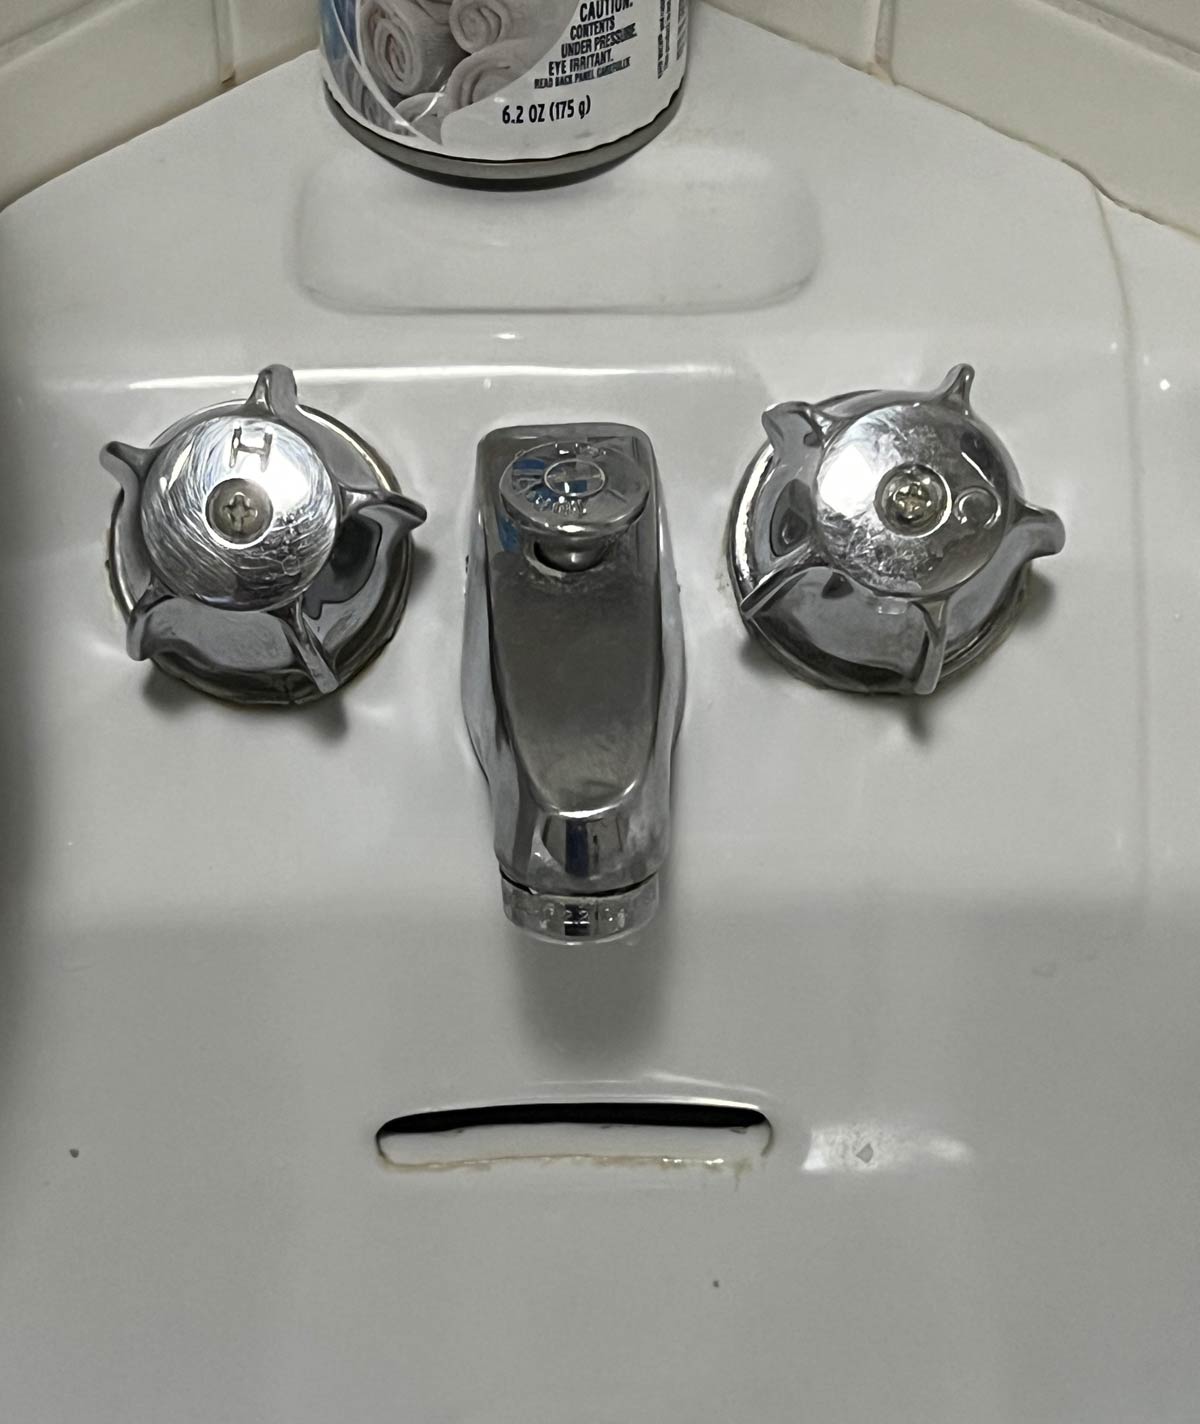 This bathroom sink has seen some things